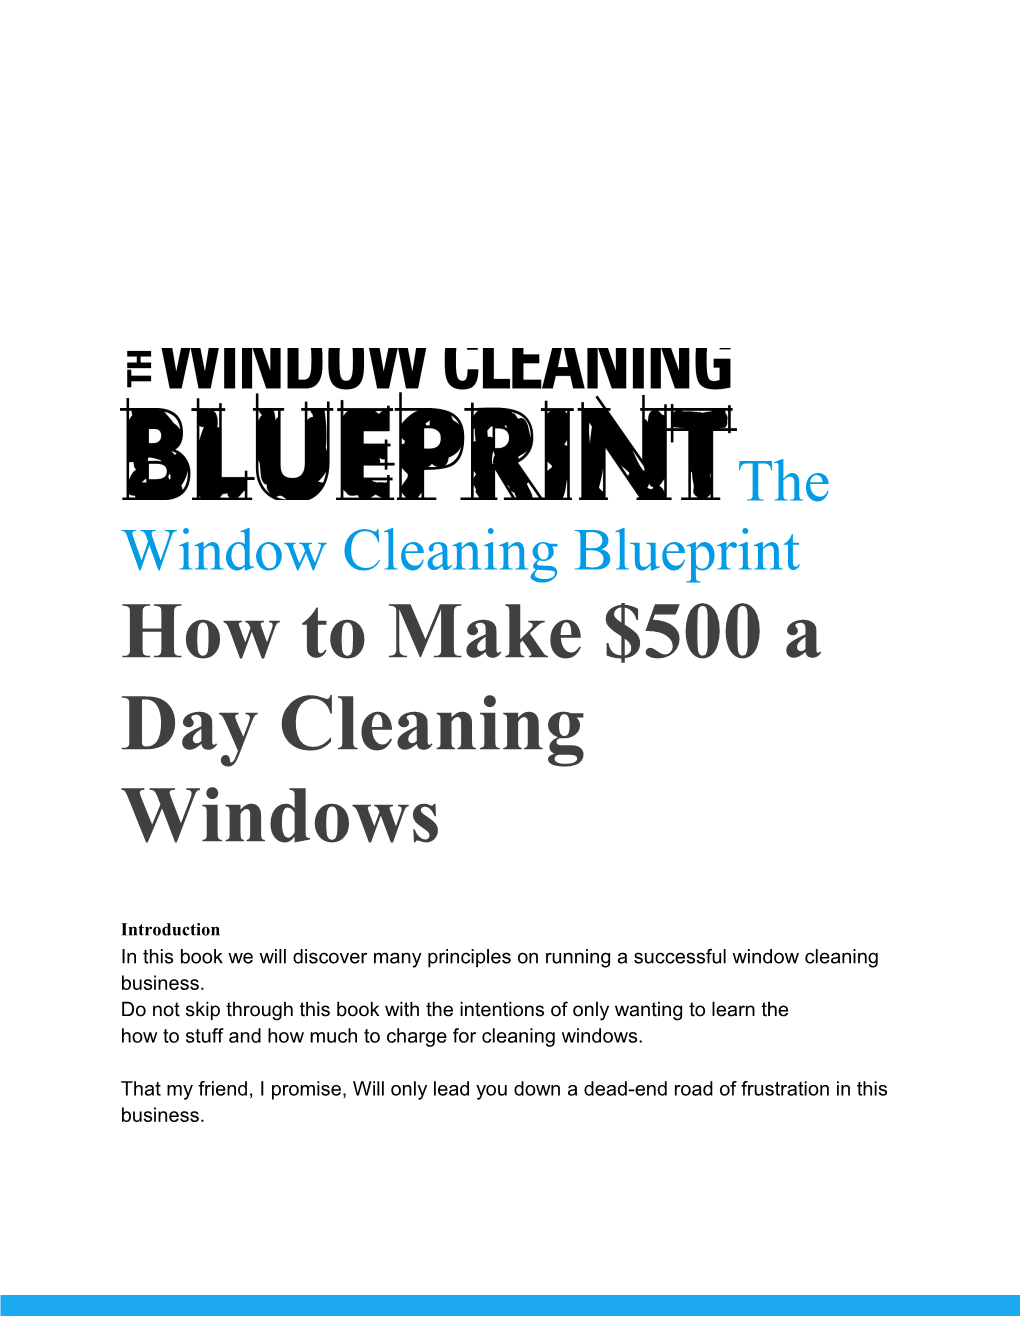 In This Book We Will Discover Many Principles on Running a Successful Window Cleaning Business